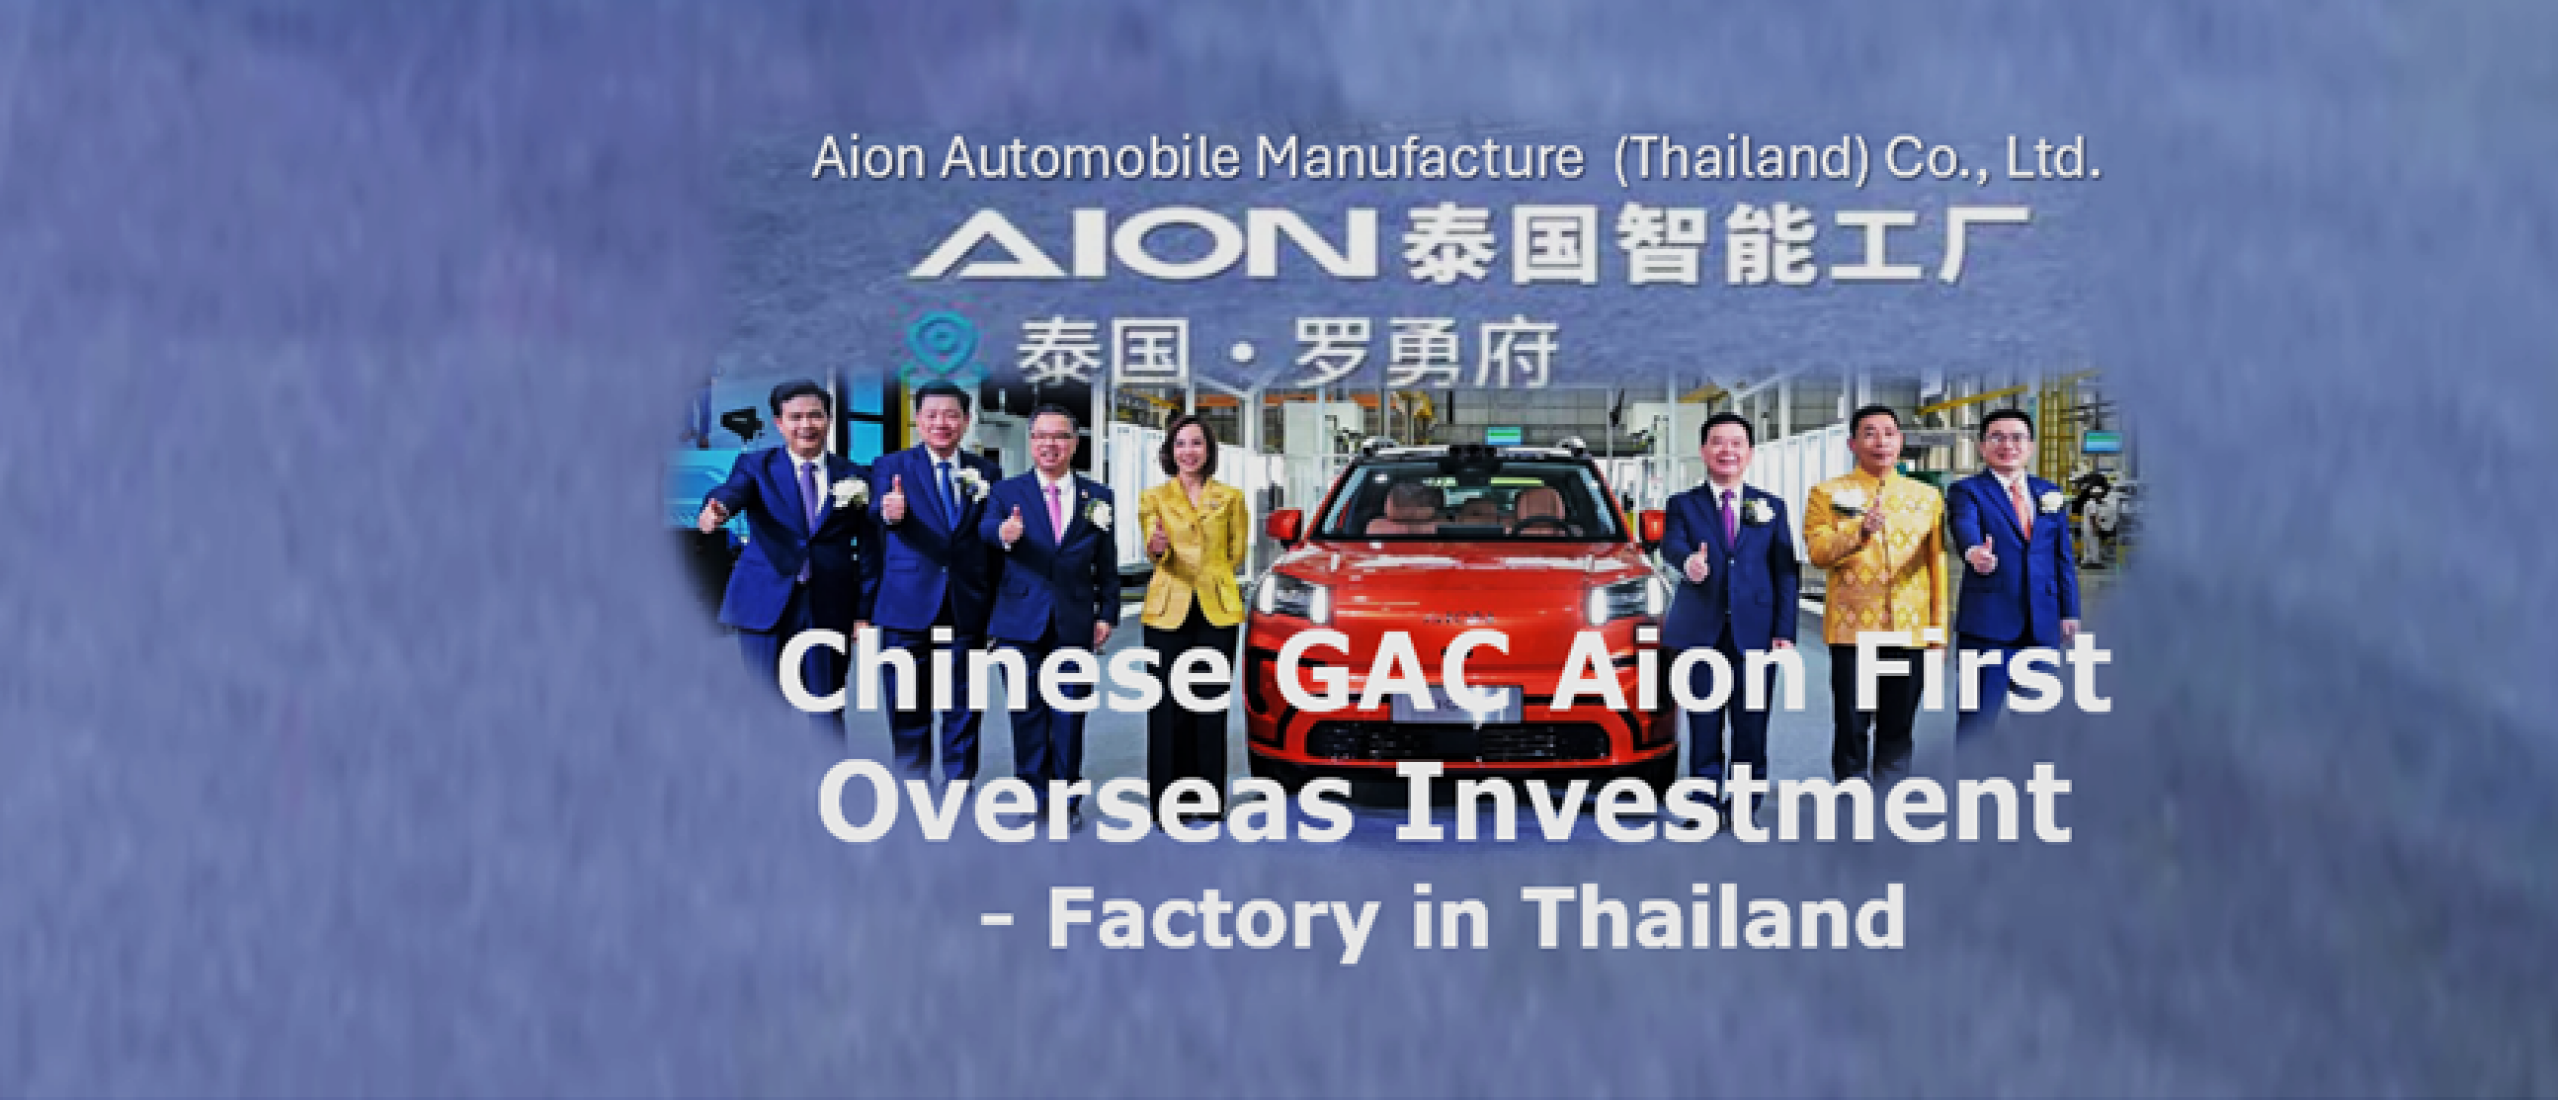 Chinese GAC Aion first overseas investment - factory in Thailand